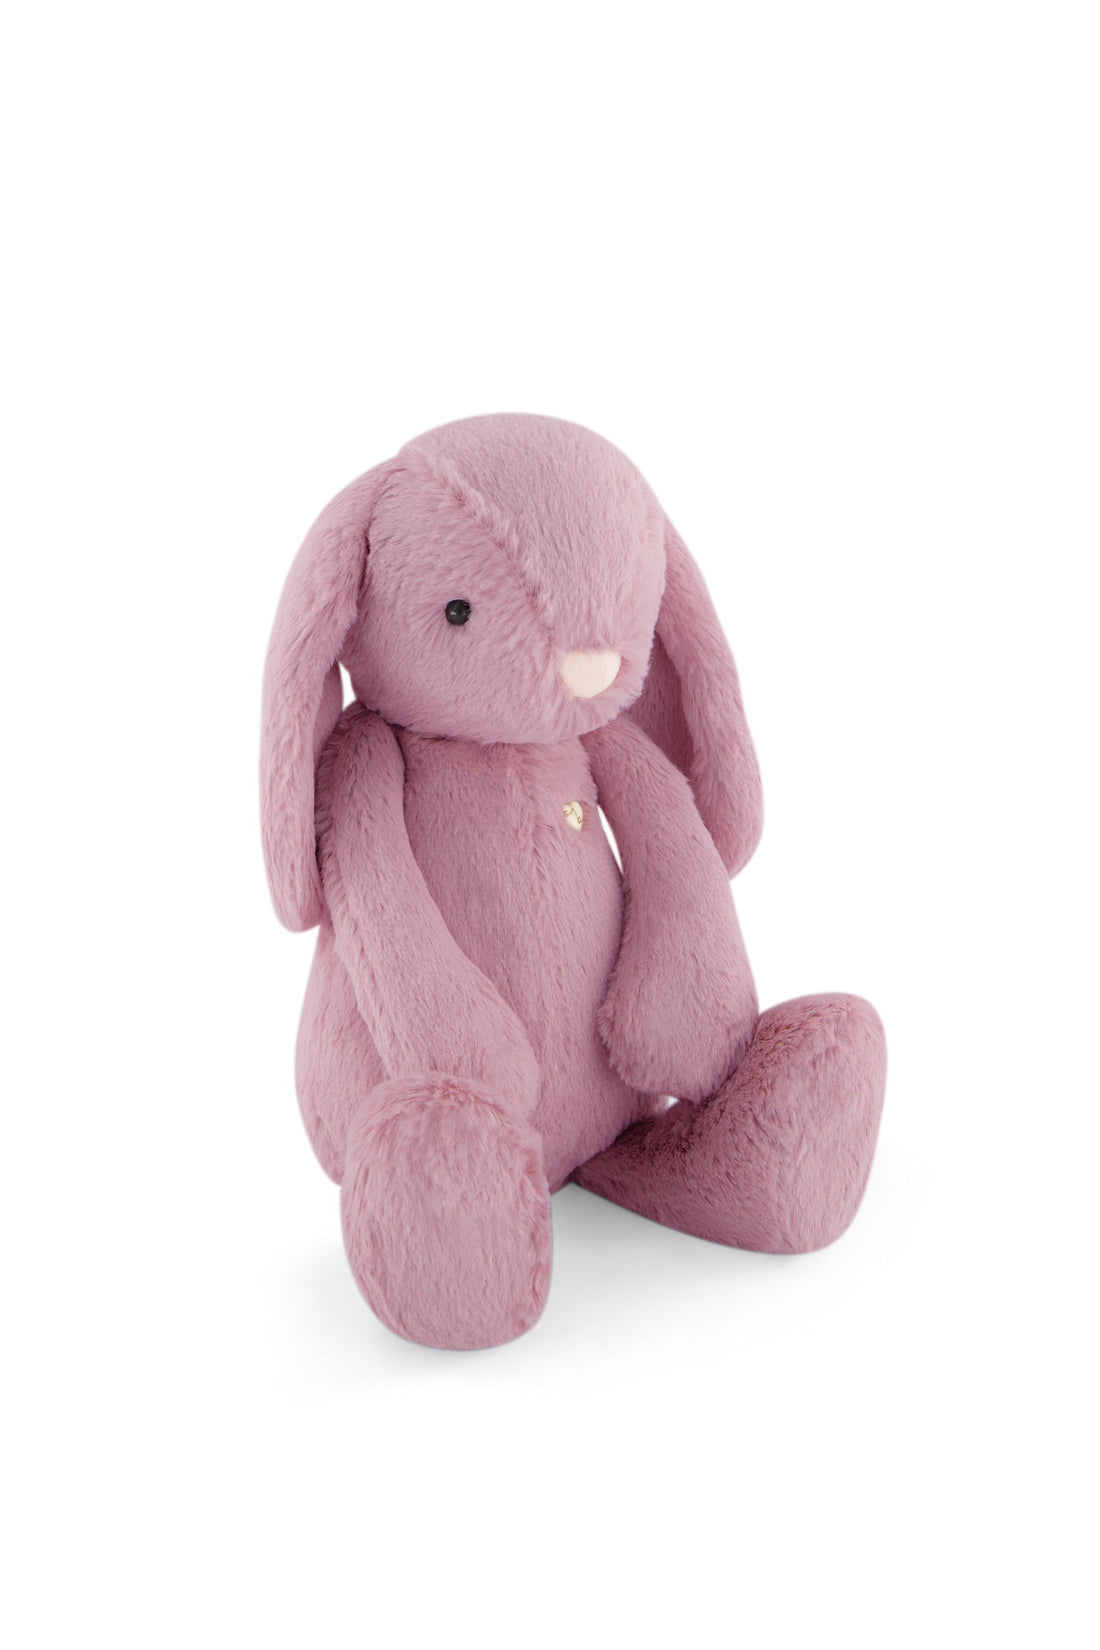 Snuggle Bunnies - Penelope the Bunny - Lilium Childrens Toy from Jamie Kay NZ